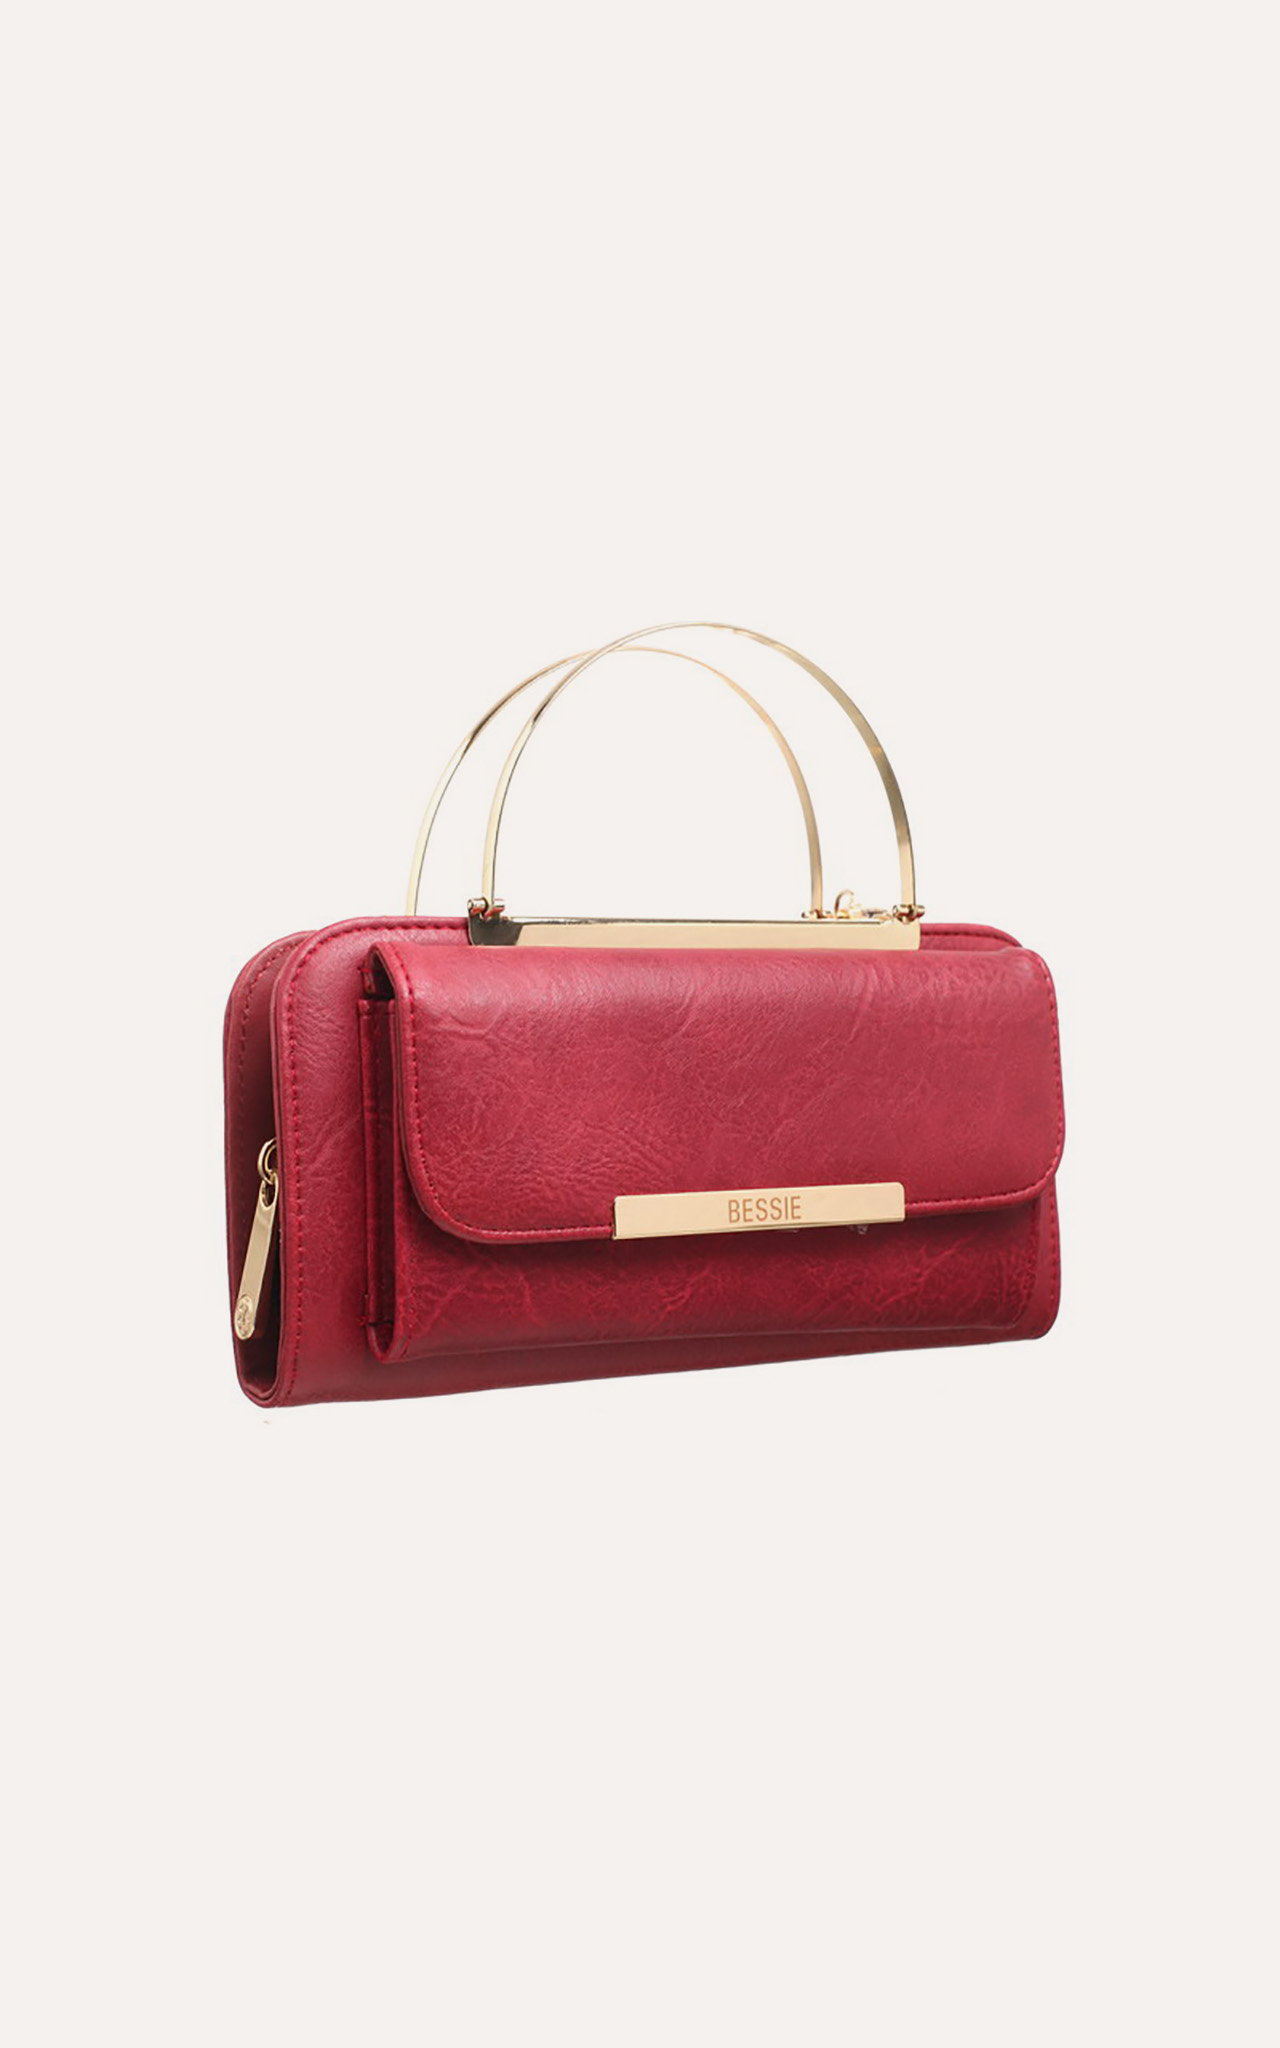 Bessie London – Perfectly on-trend and practical,shop the Bessie